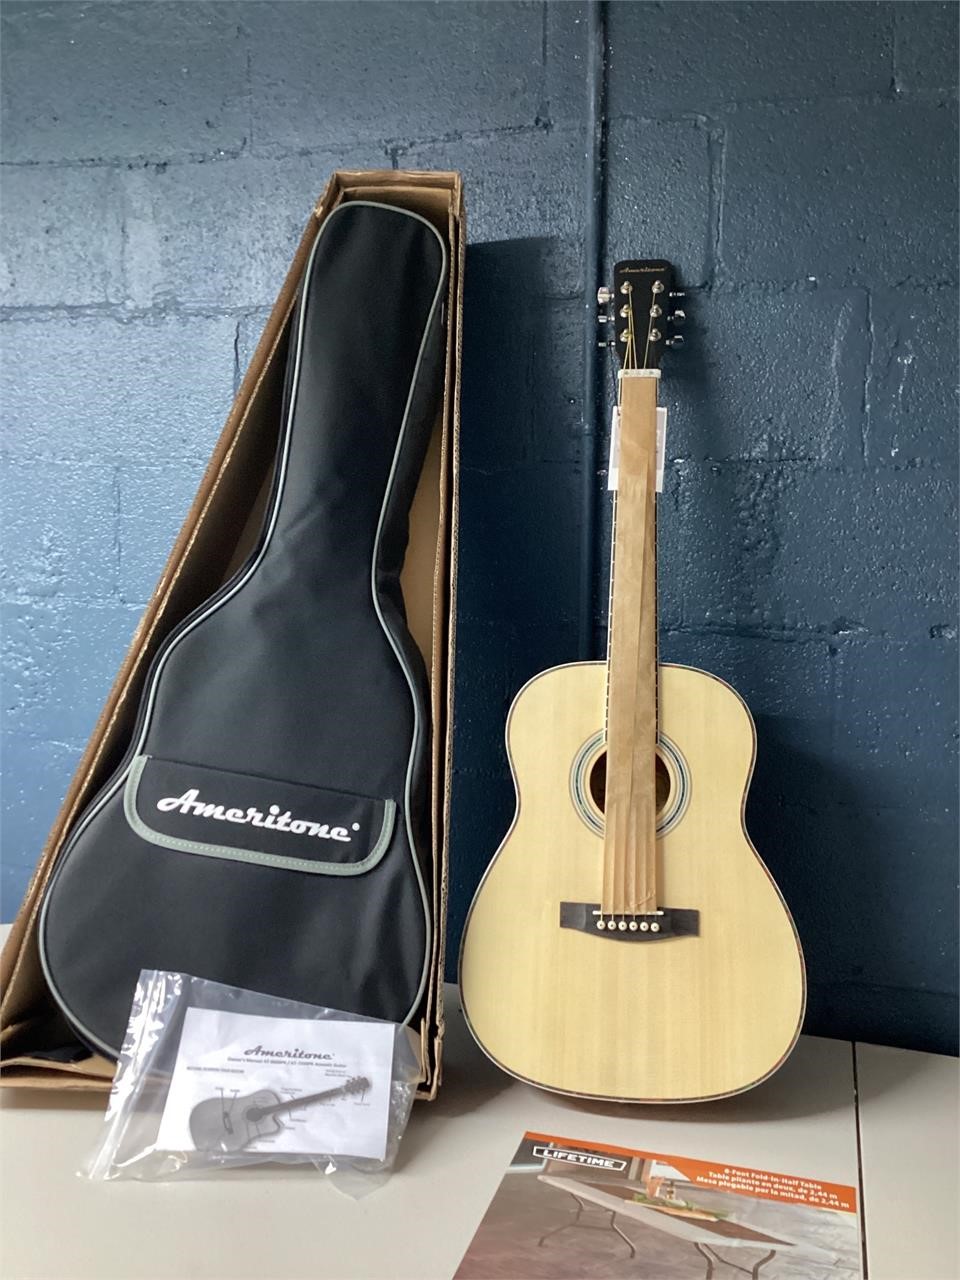 Ameritone guitar with back pack case